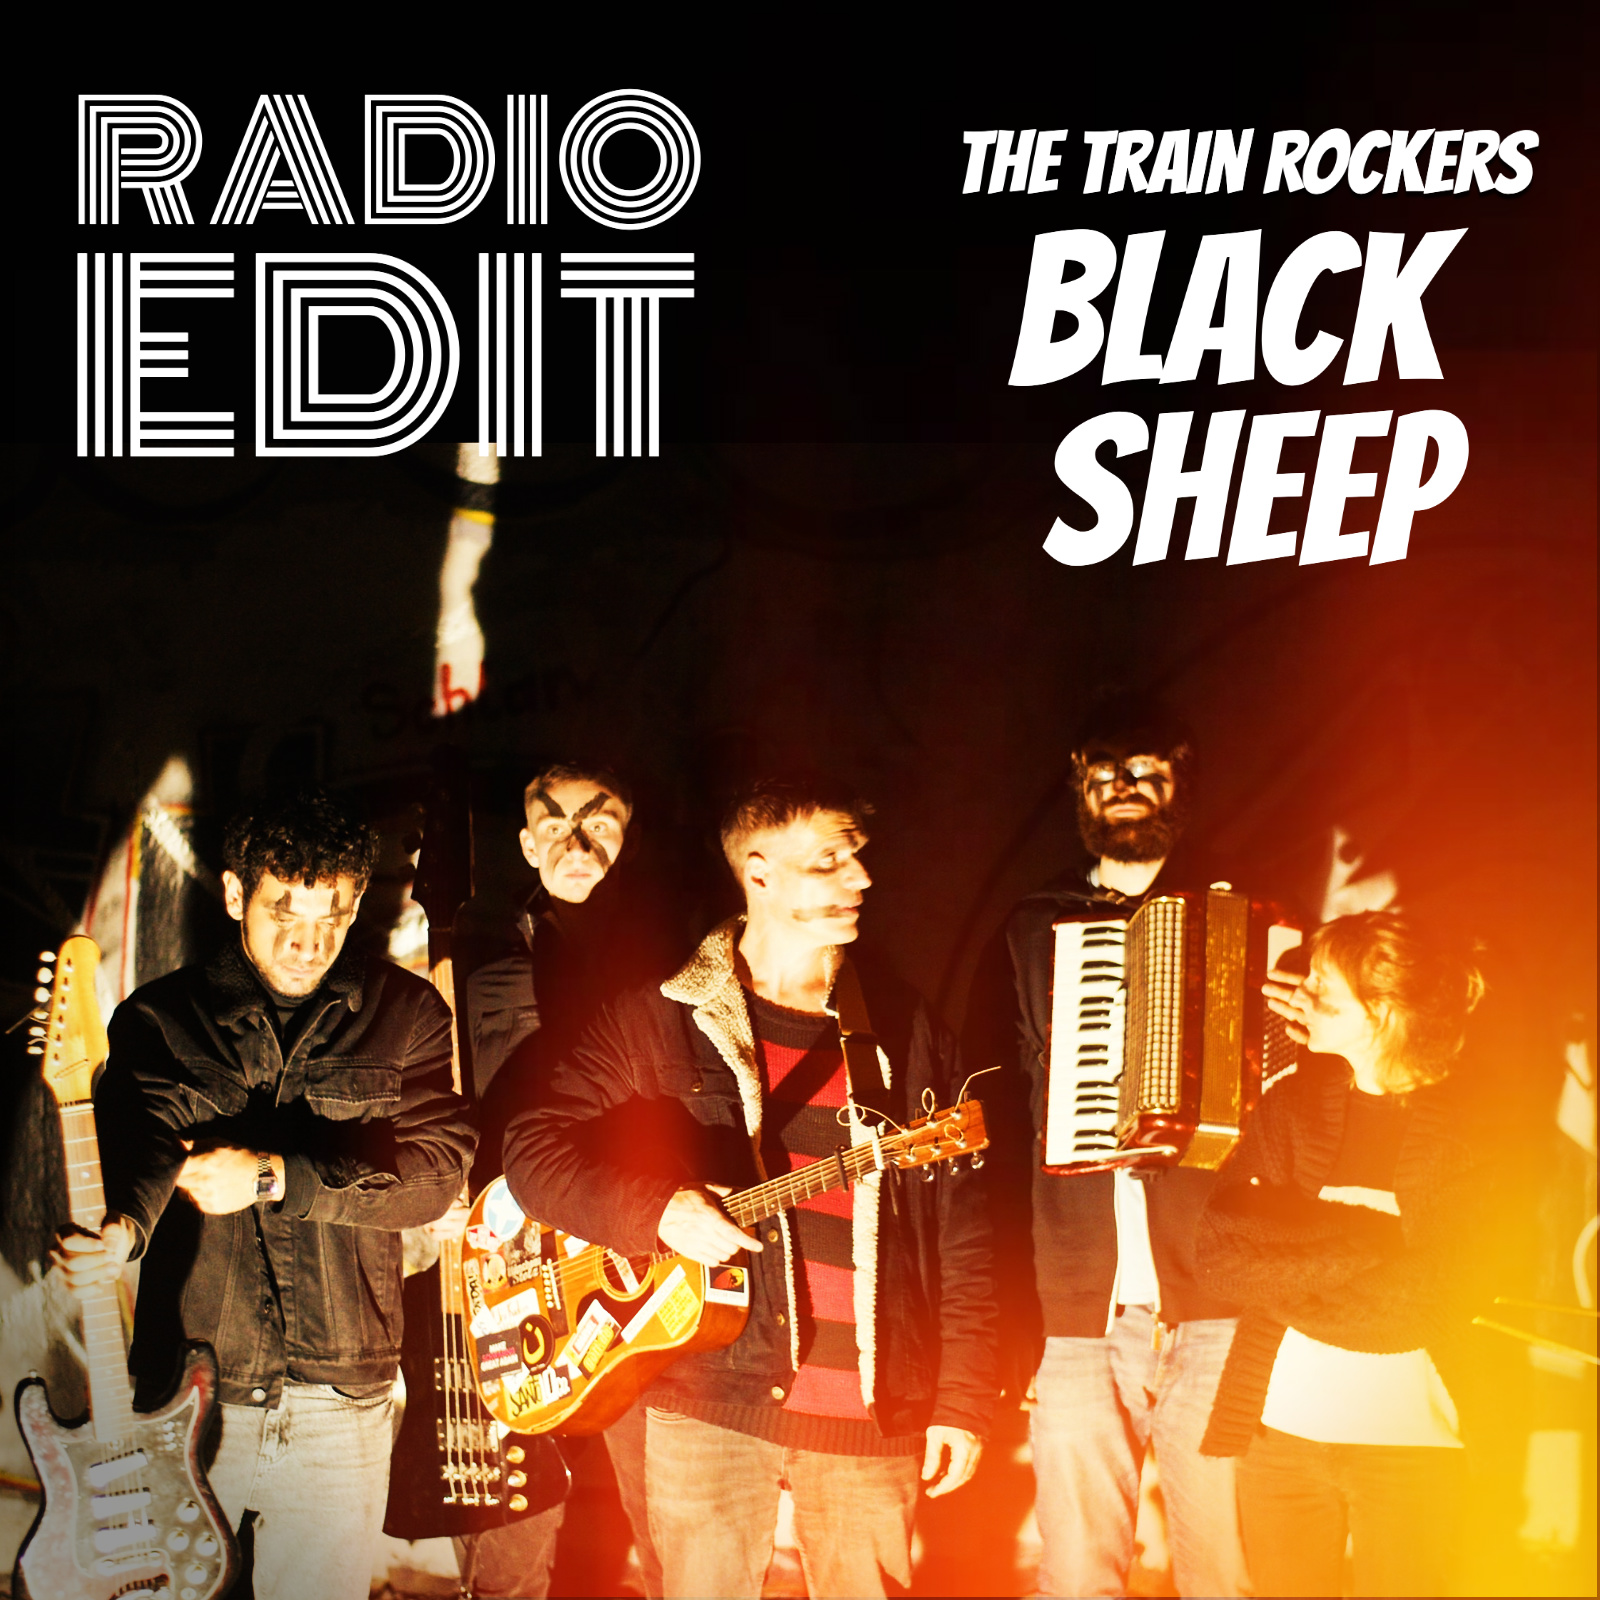 THE TRAIN ROCKERS out with 'Black Sheep,' And this is their cover art.